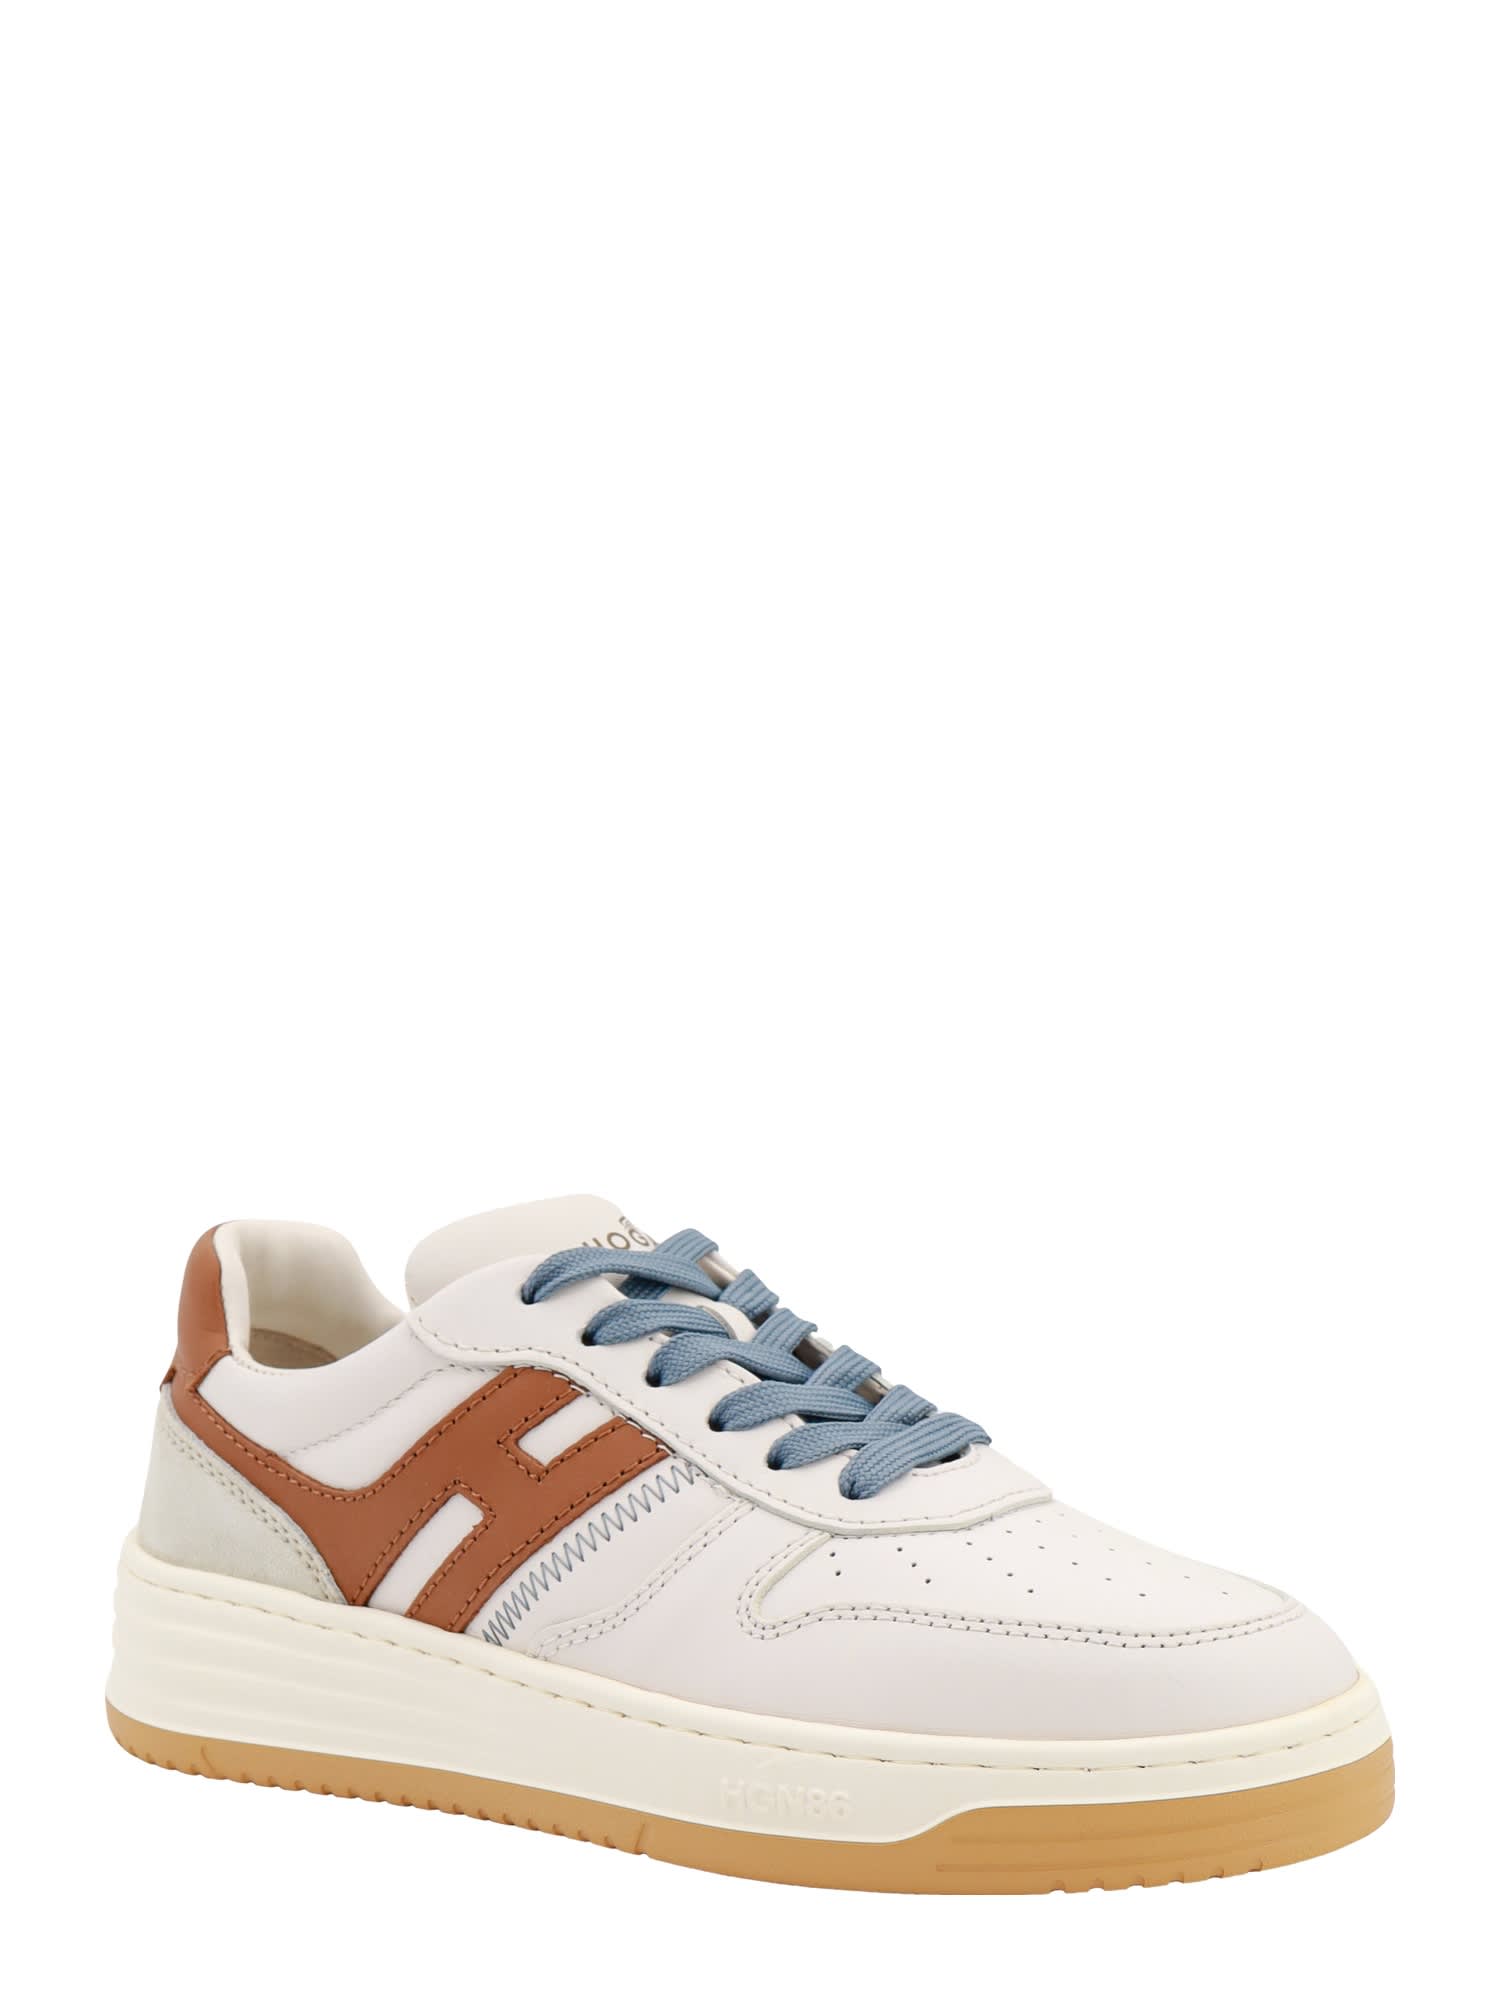 Shop Hogan H630 Sneakers In Leather Brown